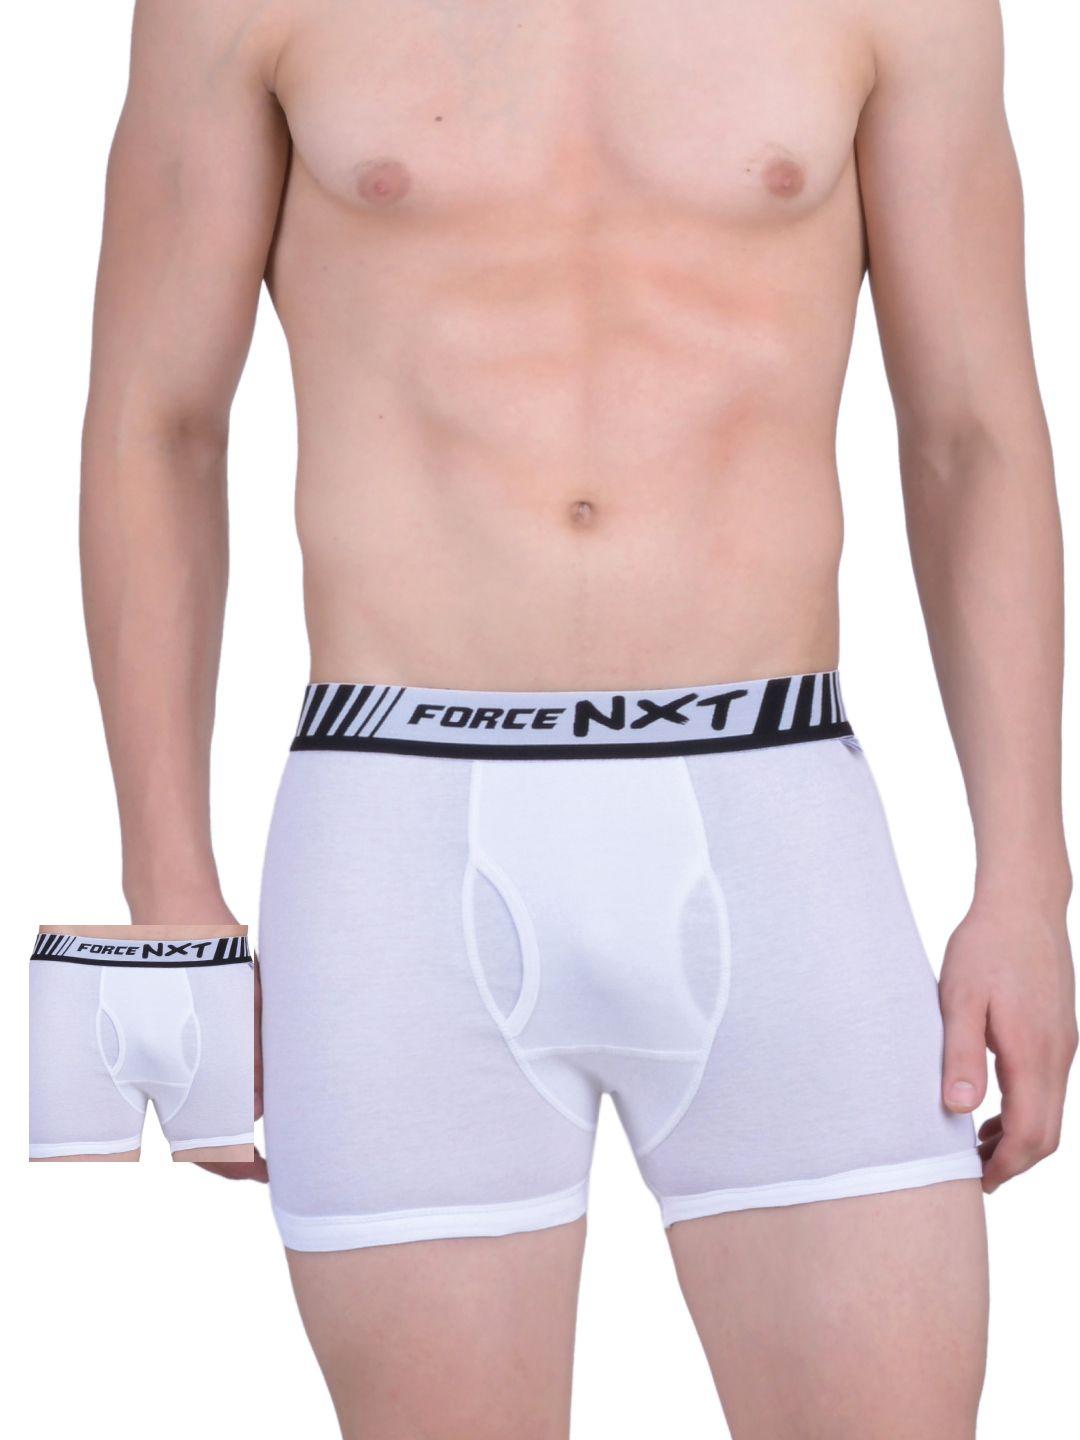 force nxt pack of 2 white assorted trunks mnfr-211